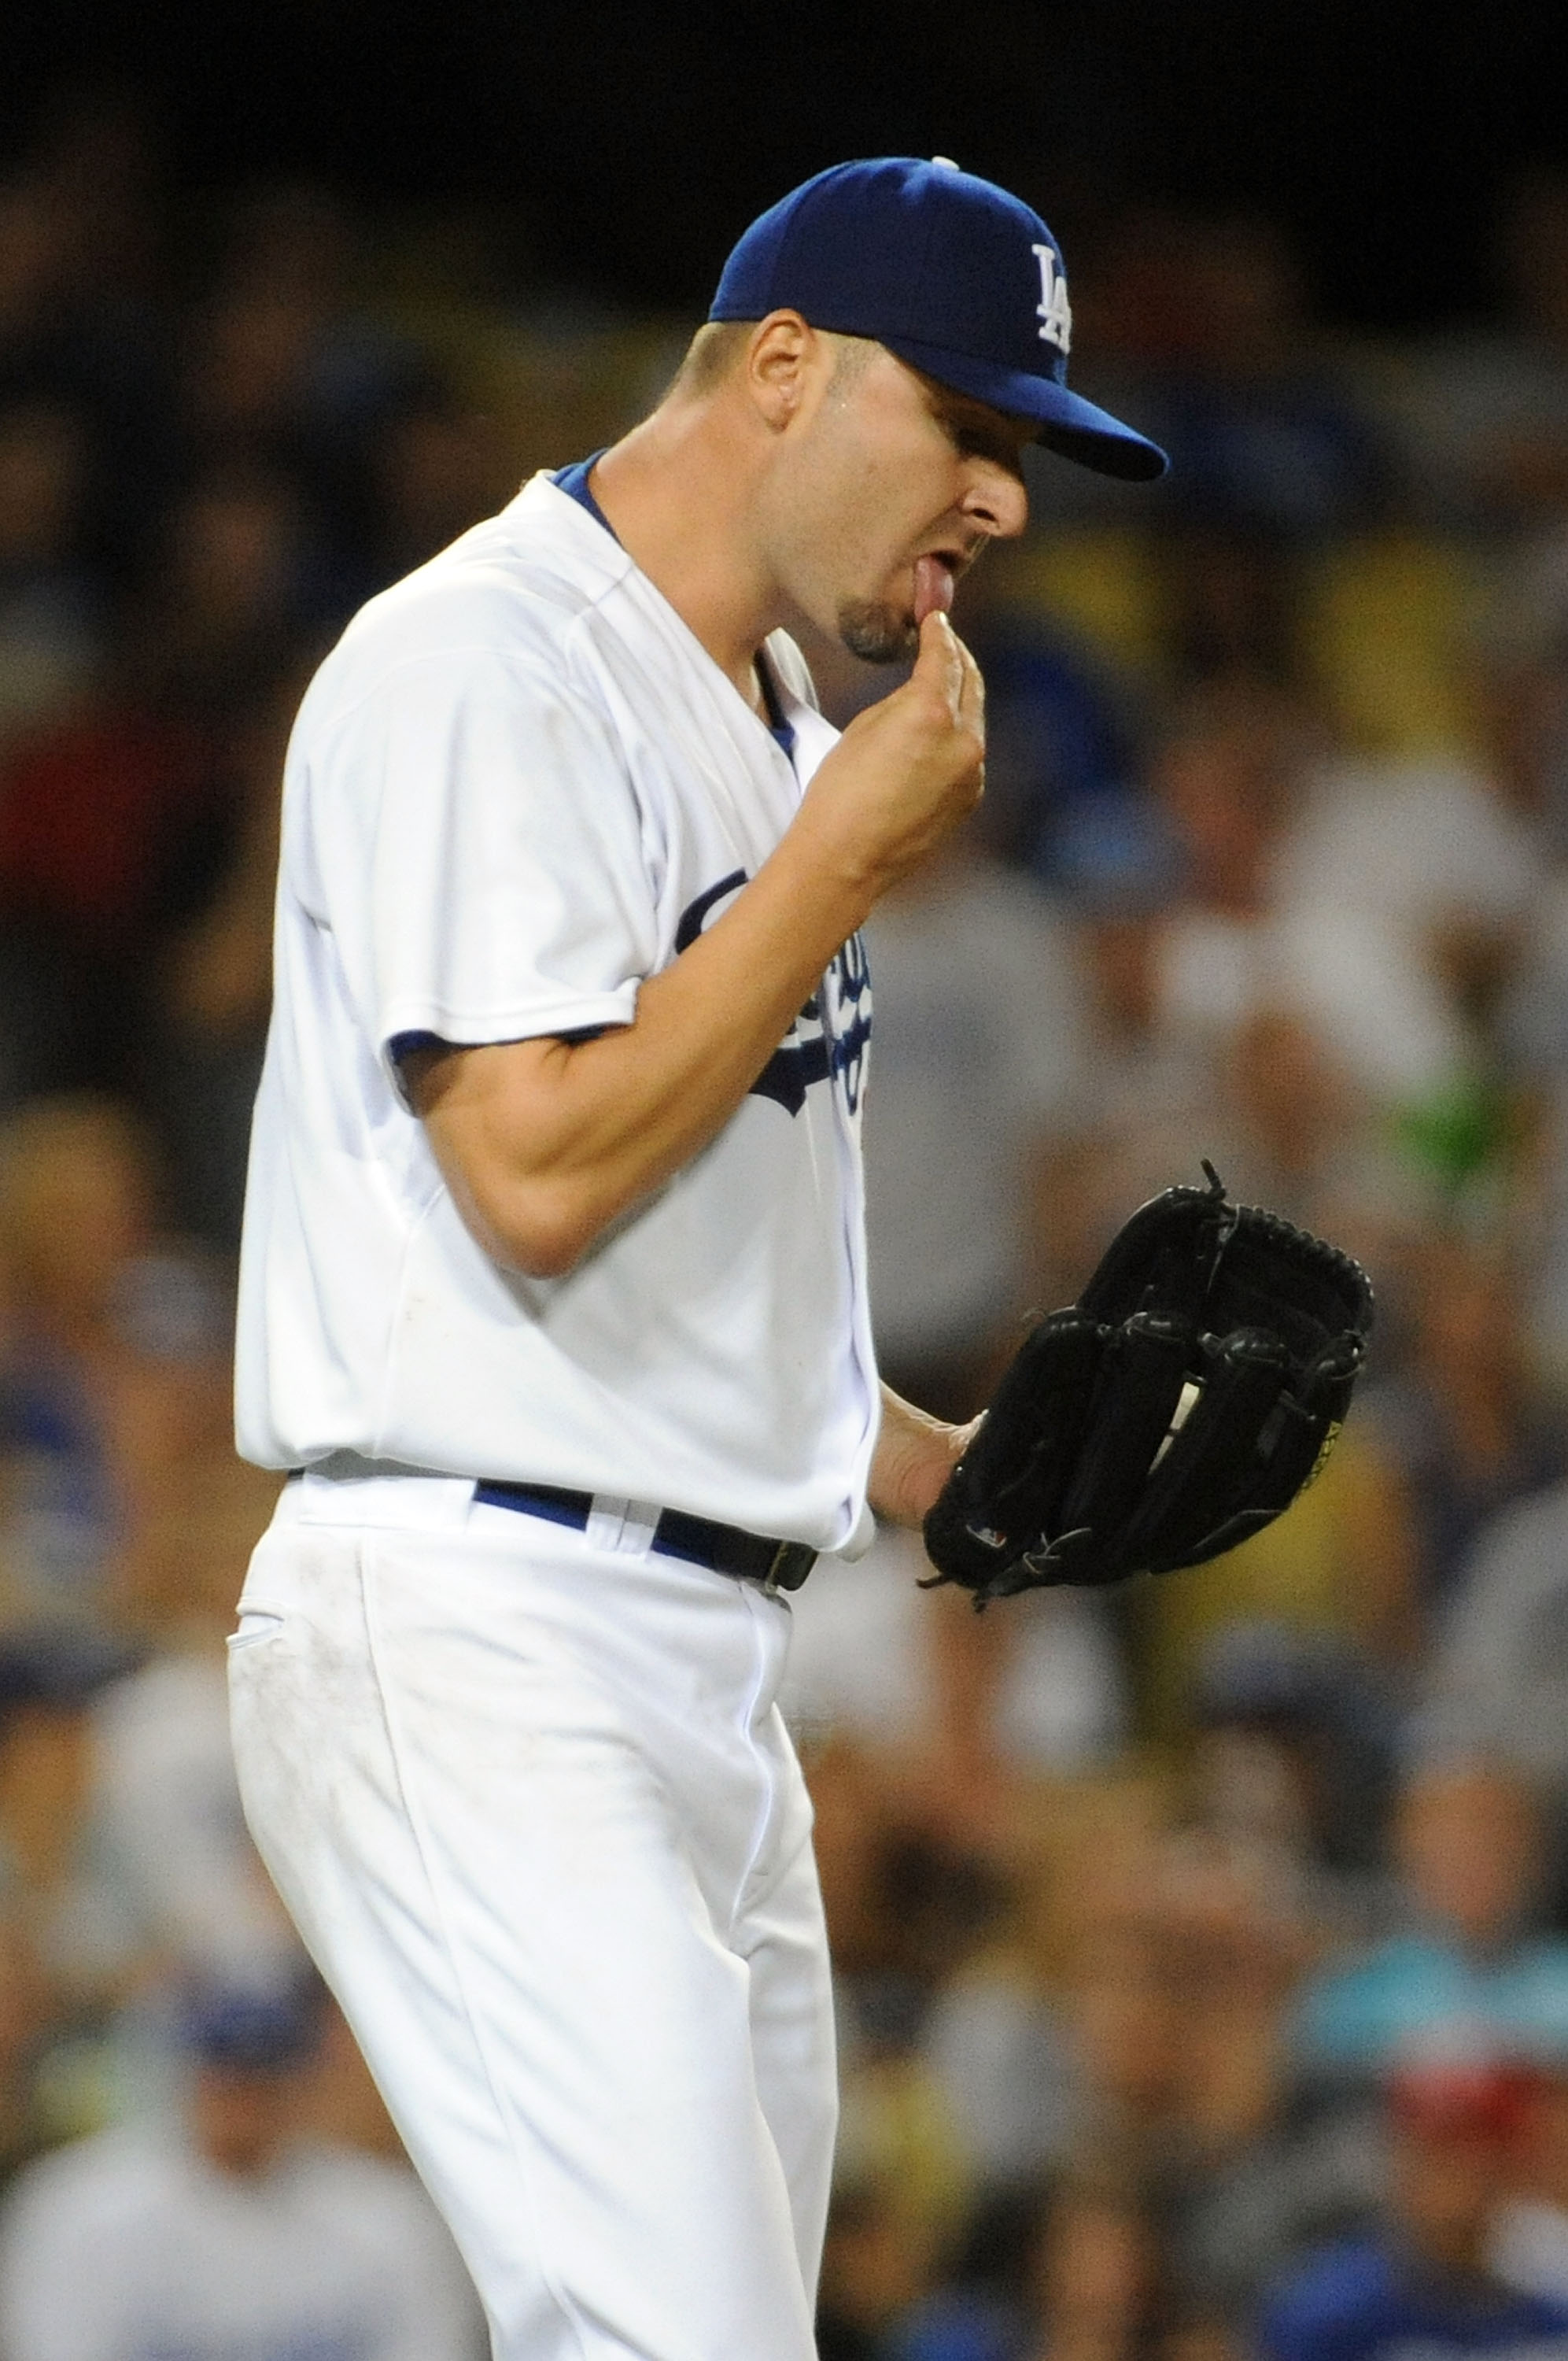 LOS ANGELES, CA - AUGUST 5: Jason Schmidt #29 of the Los Angeles Dodgers reacts after hitting Craig Counsell #30 of the Milwaukee Brewers in the fourth inning at Dodger Stadium August 5, 2009 in Los Angeles, California.  (Photo by Harry How/Getty Images)